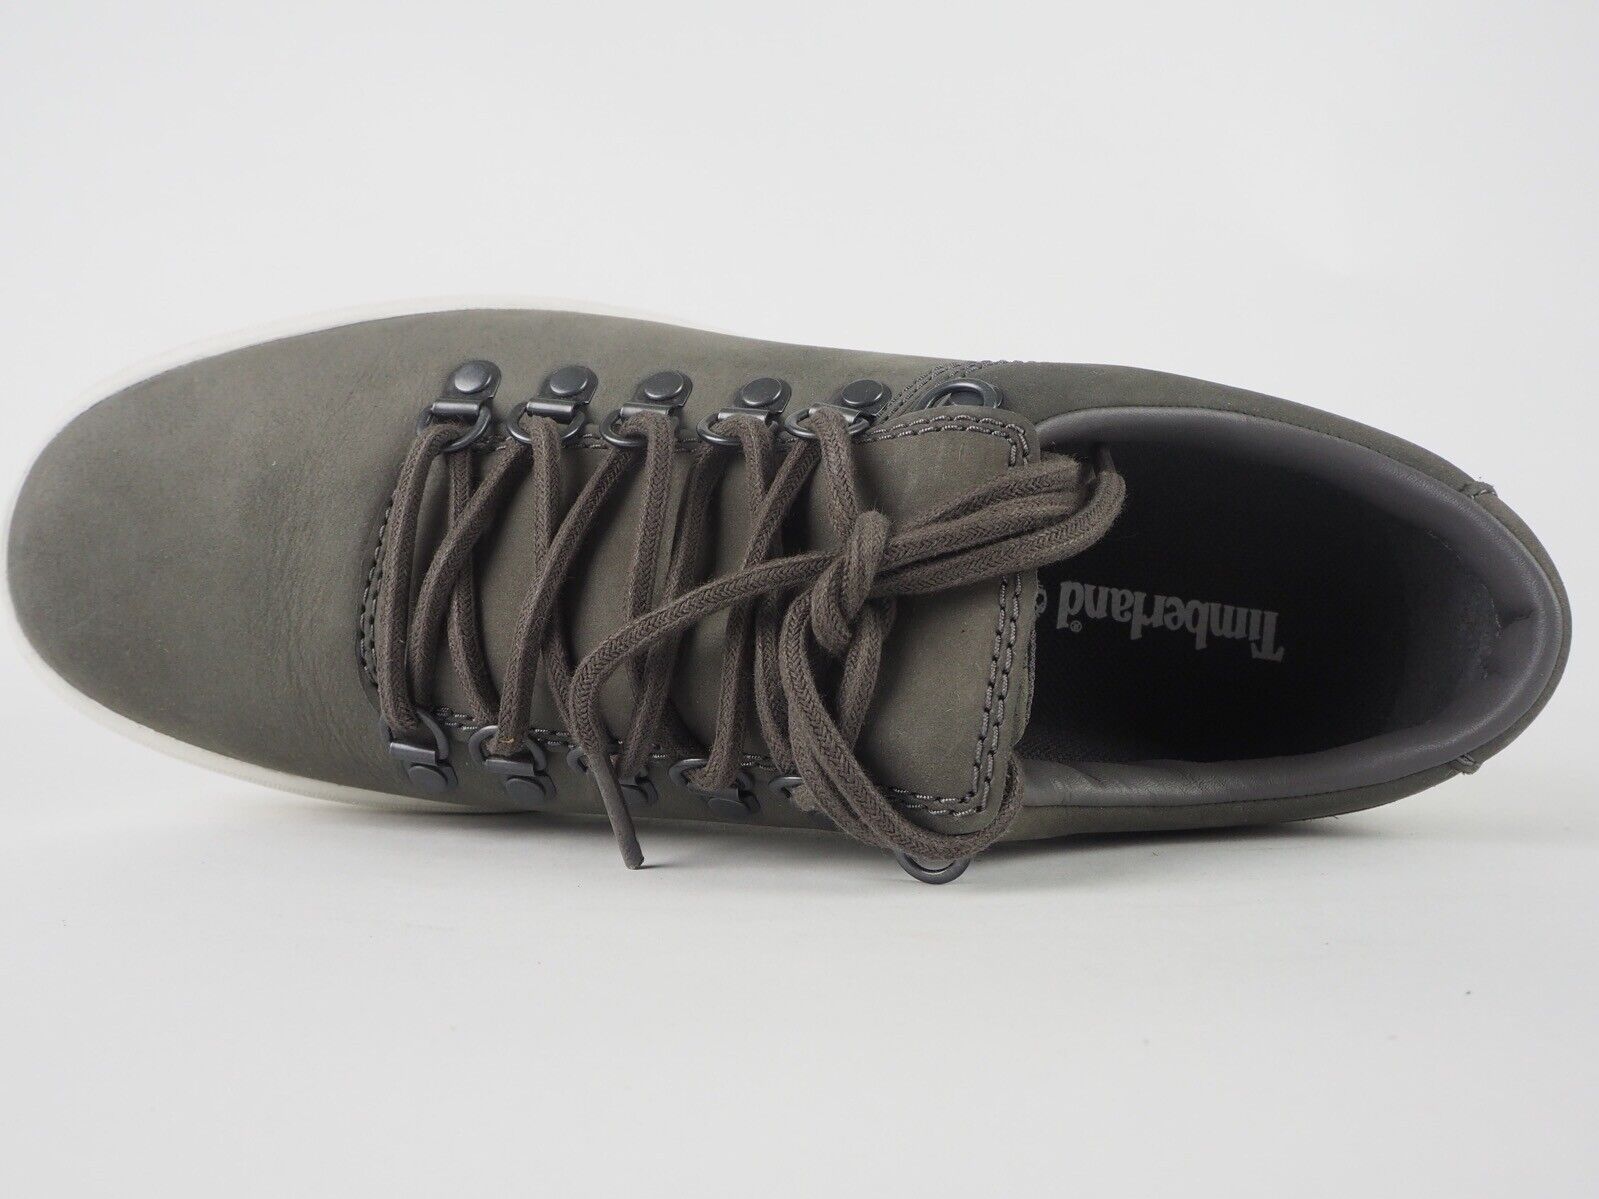 Mens Timberland Adv 2.0 Cup Alpine Oxford A1PIL Dark Grey Leather Laced Trainers - London Top Style